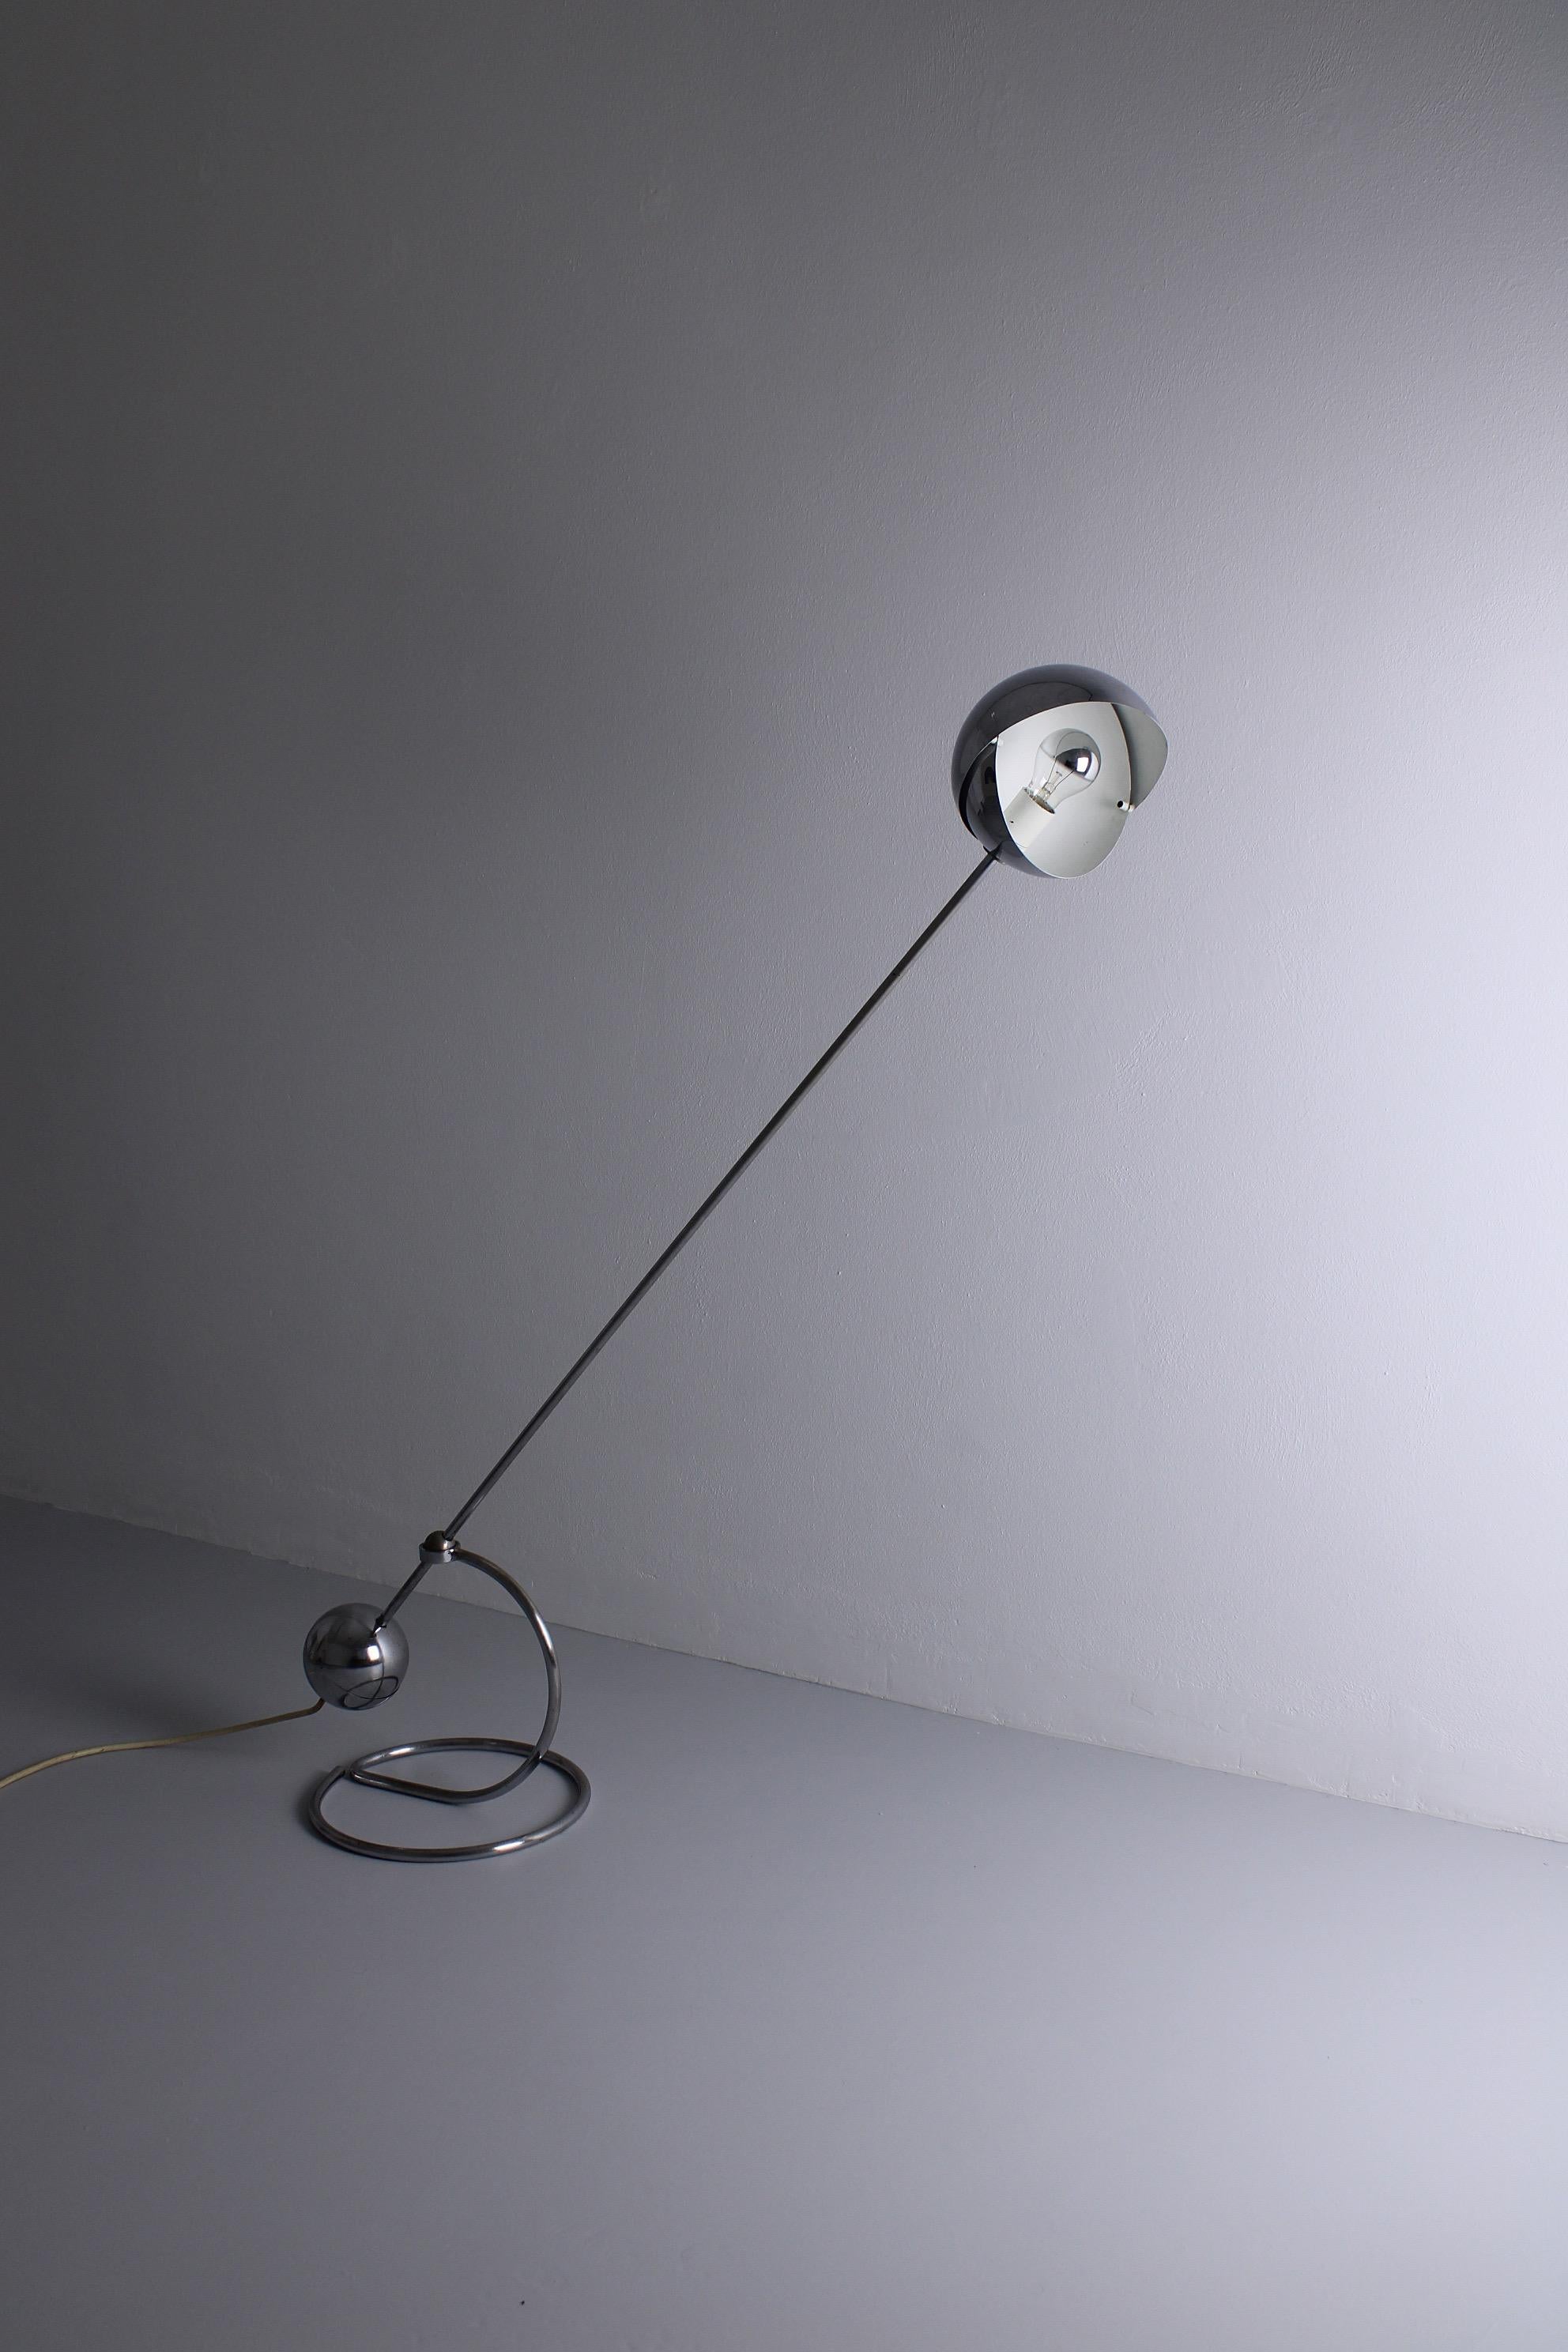 Floor lamp model S3 was designed by Paolo Tilche for Sirrah, Italy, in 1961. This piece has a round counterweight that creates the perfect balance to adjust it. The round shade is adjustable and creates a very nice spherical light when changed in